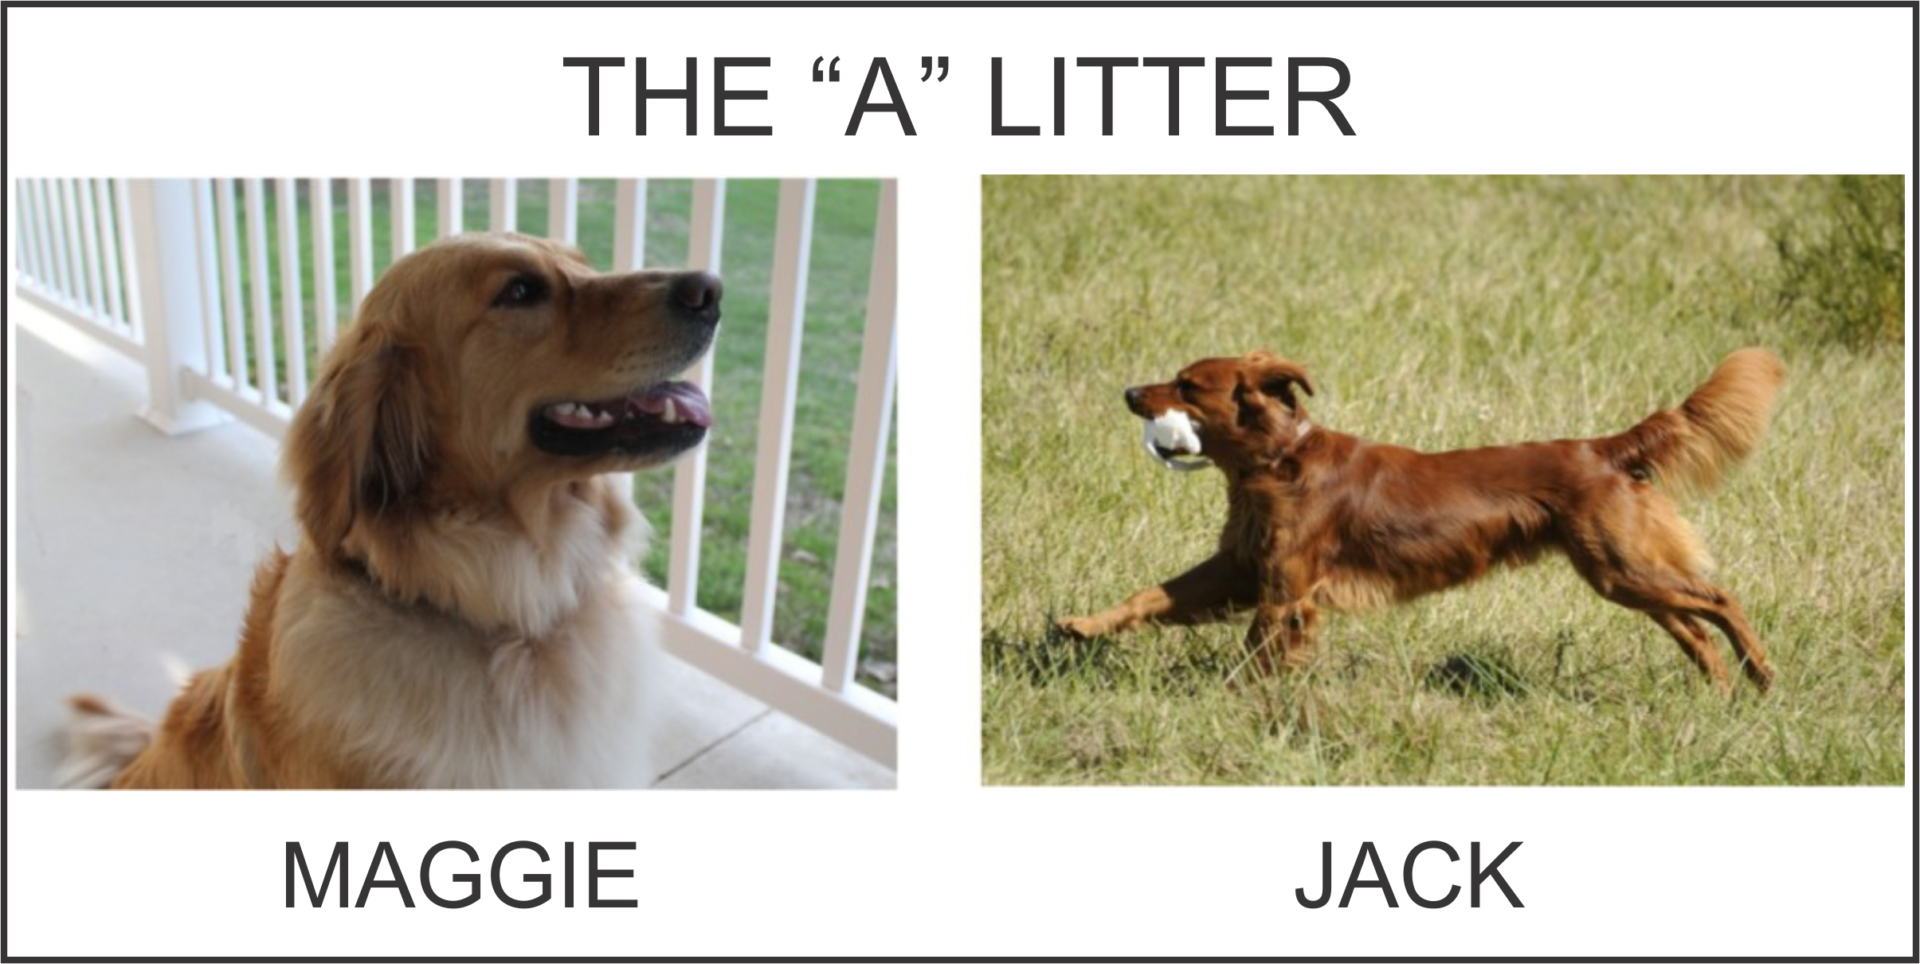 THE a LITTER IMAGE